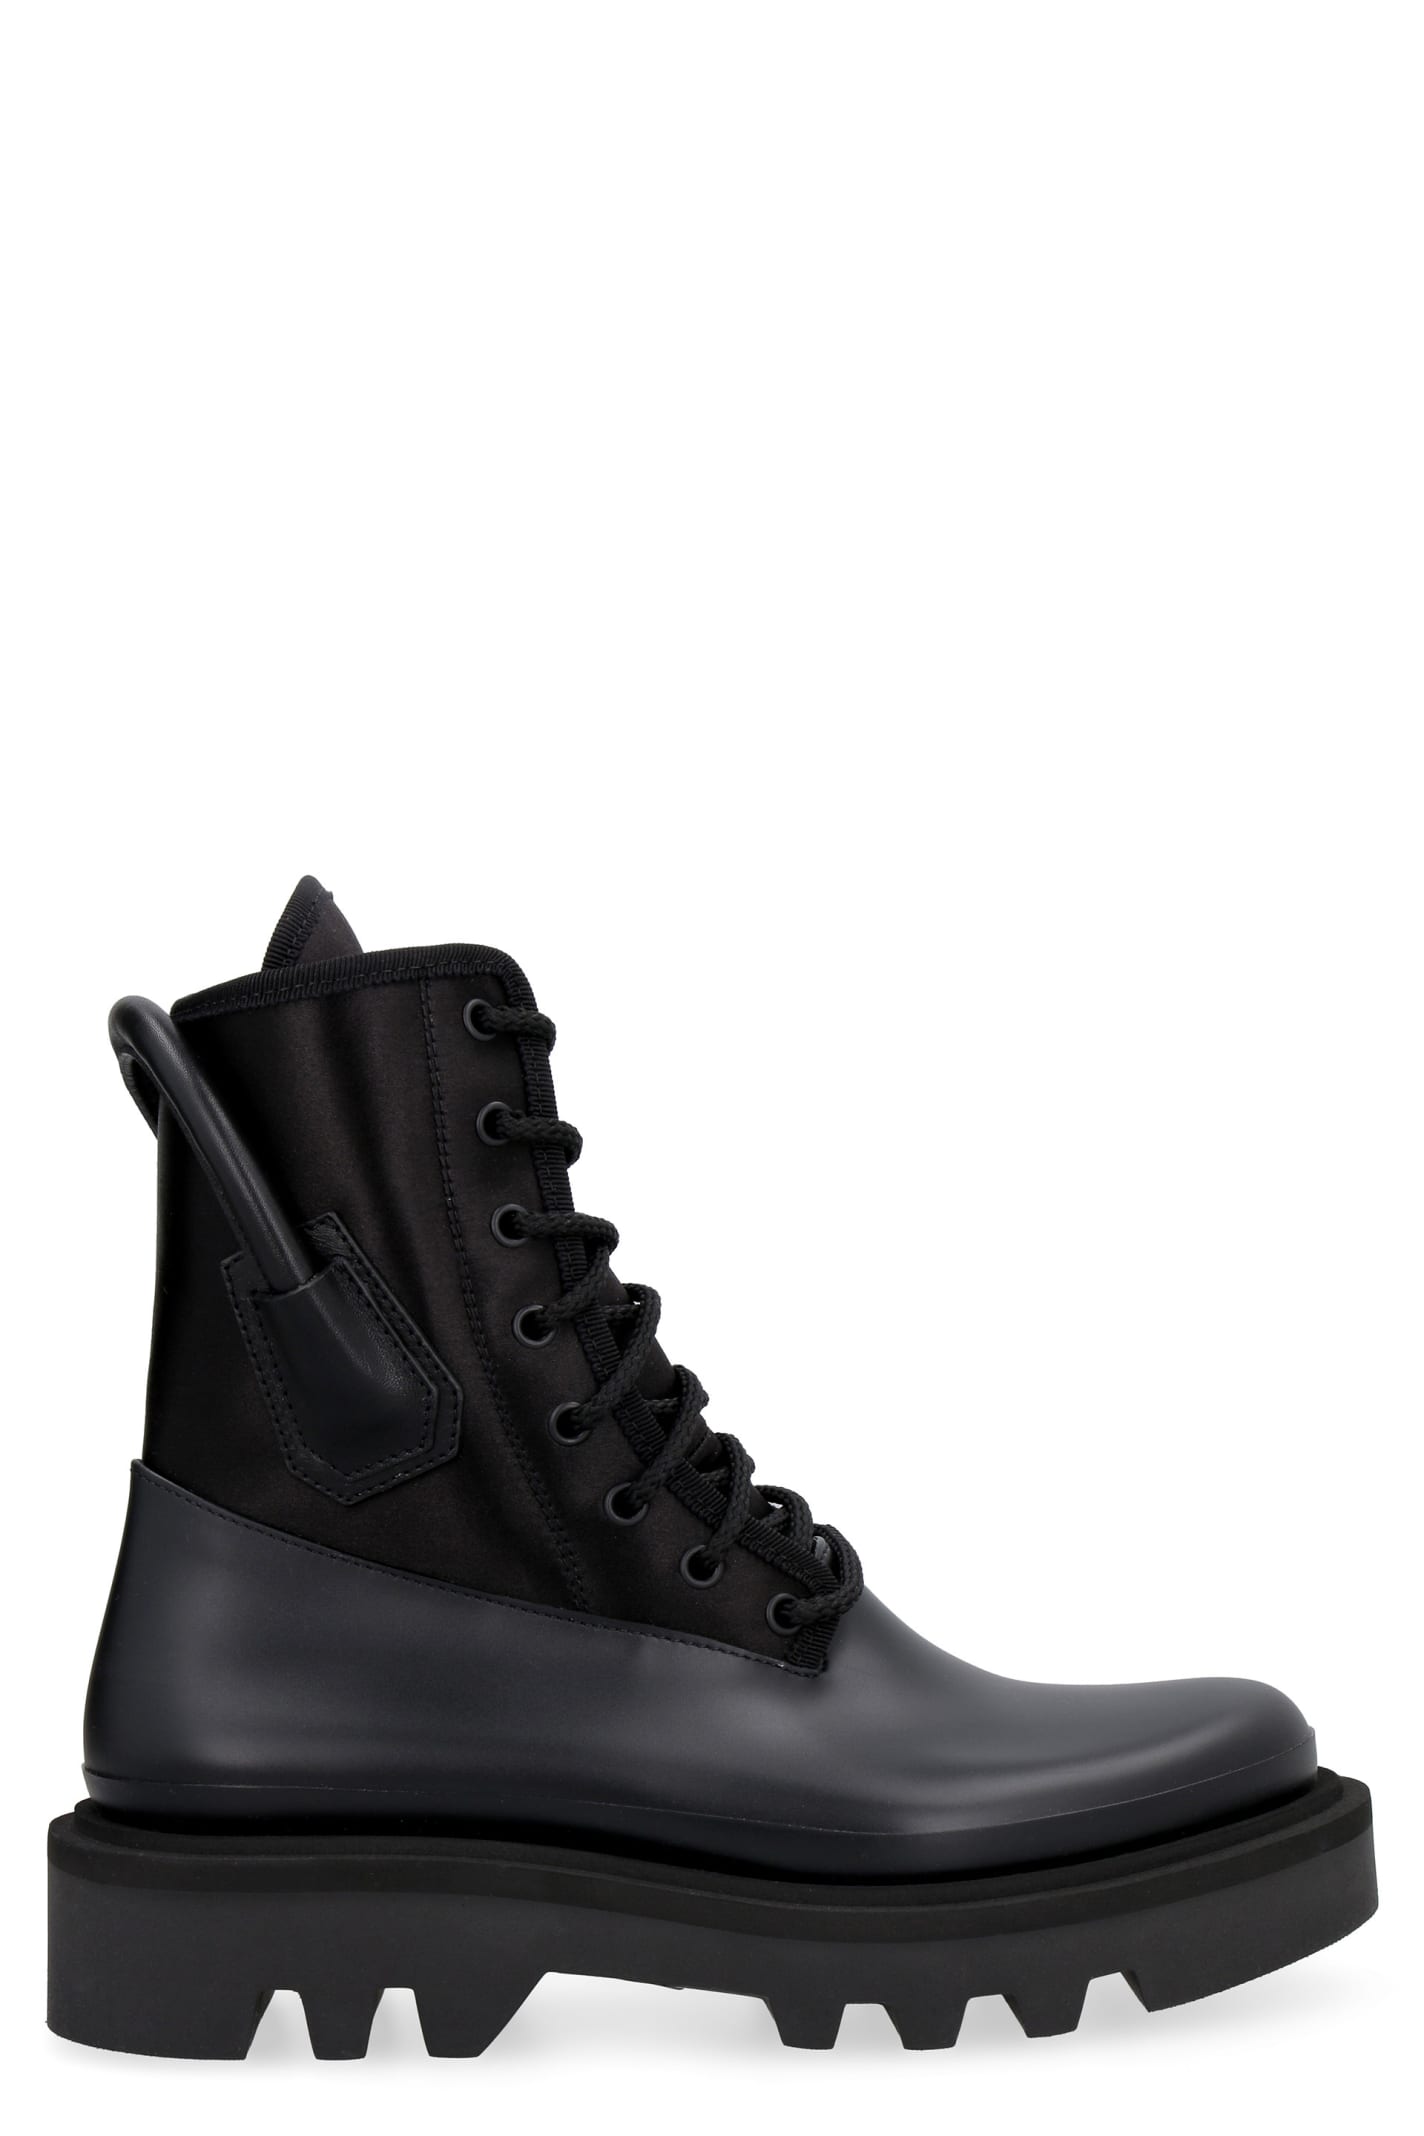 Photo of  Givenchy Lug-sole Lace-up Boots- shop Givenchy Boots online sales